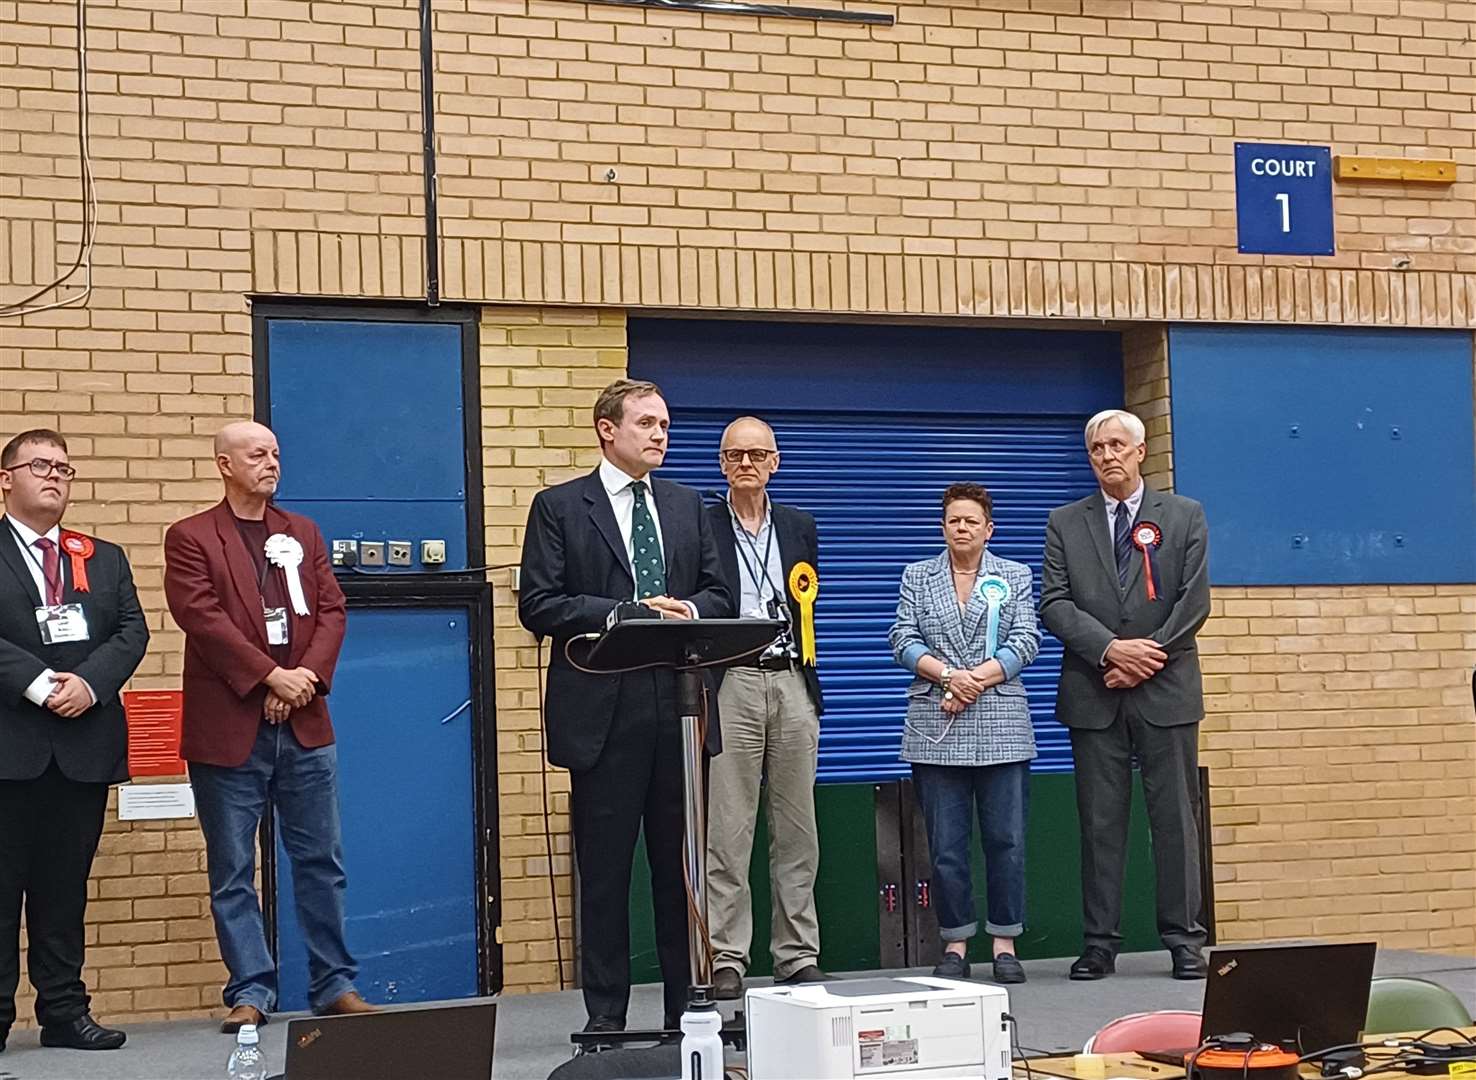 Conservative Party candidate Tom Tugendhat has returned as the MP for Tonbridge